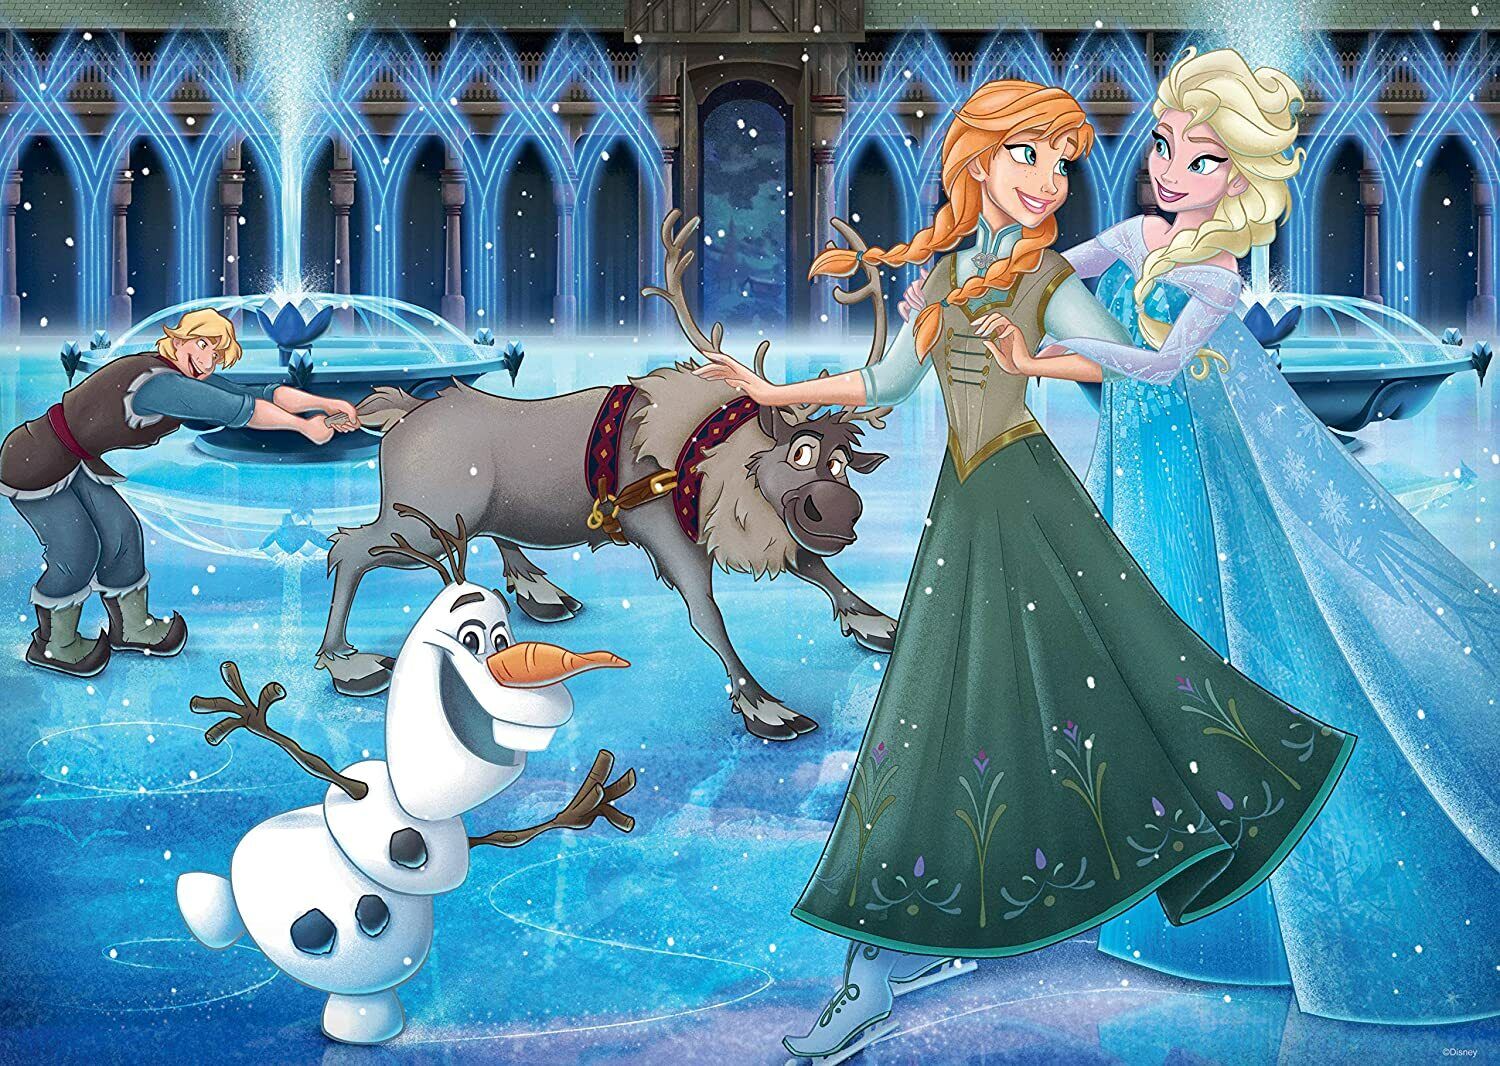 Disney Frozen 1000 Piece Puzzle by Ravensburger - Collector's Edition - NEW